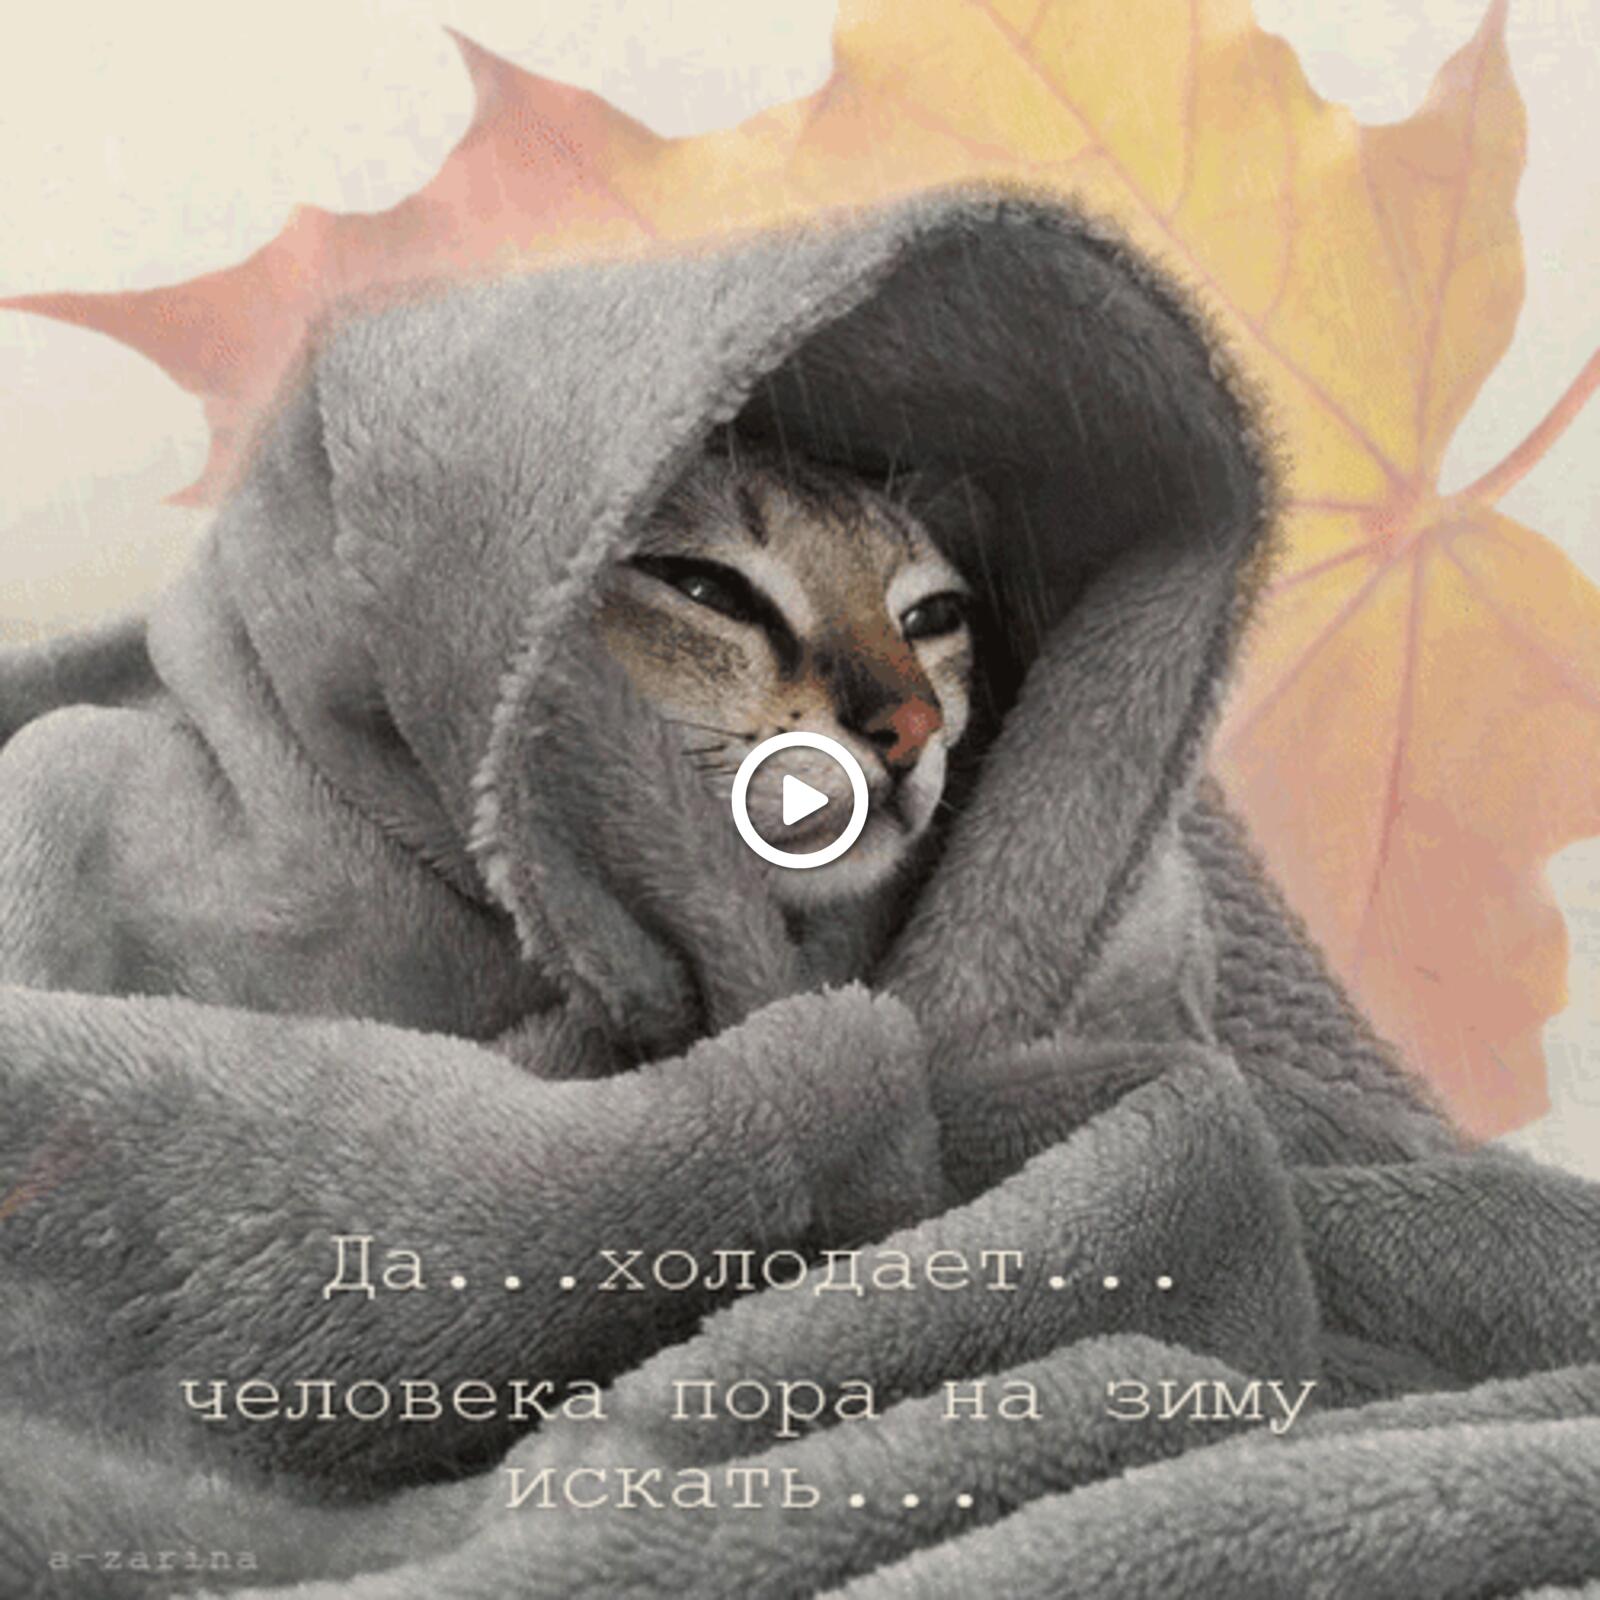 A postcard on the subject of cold autumn leaf animation for free